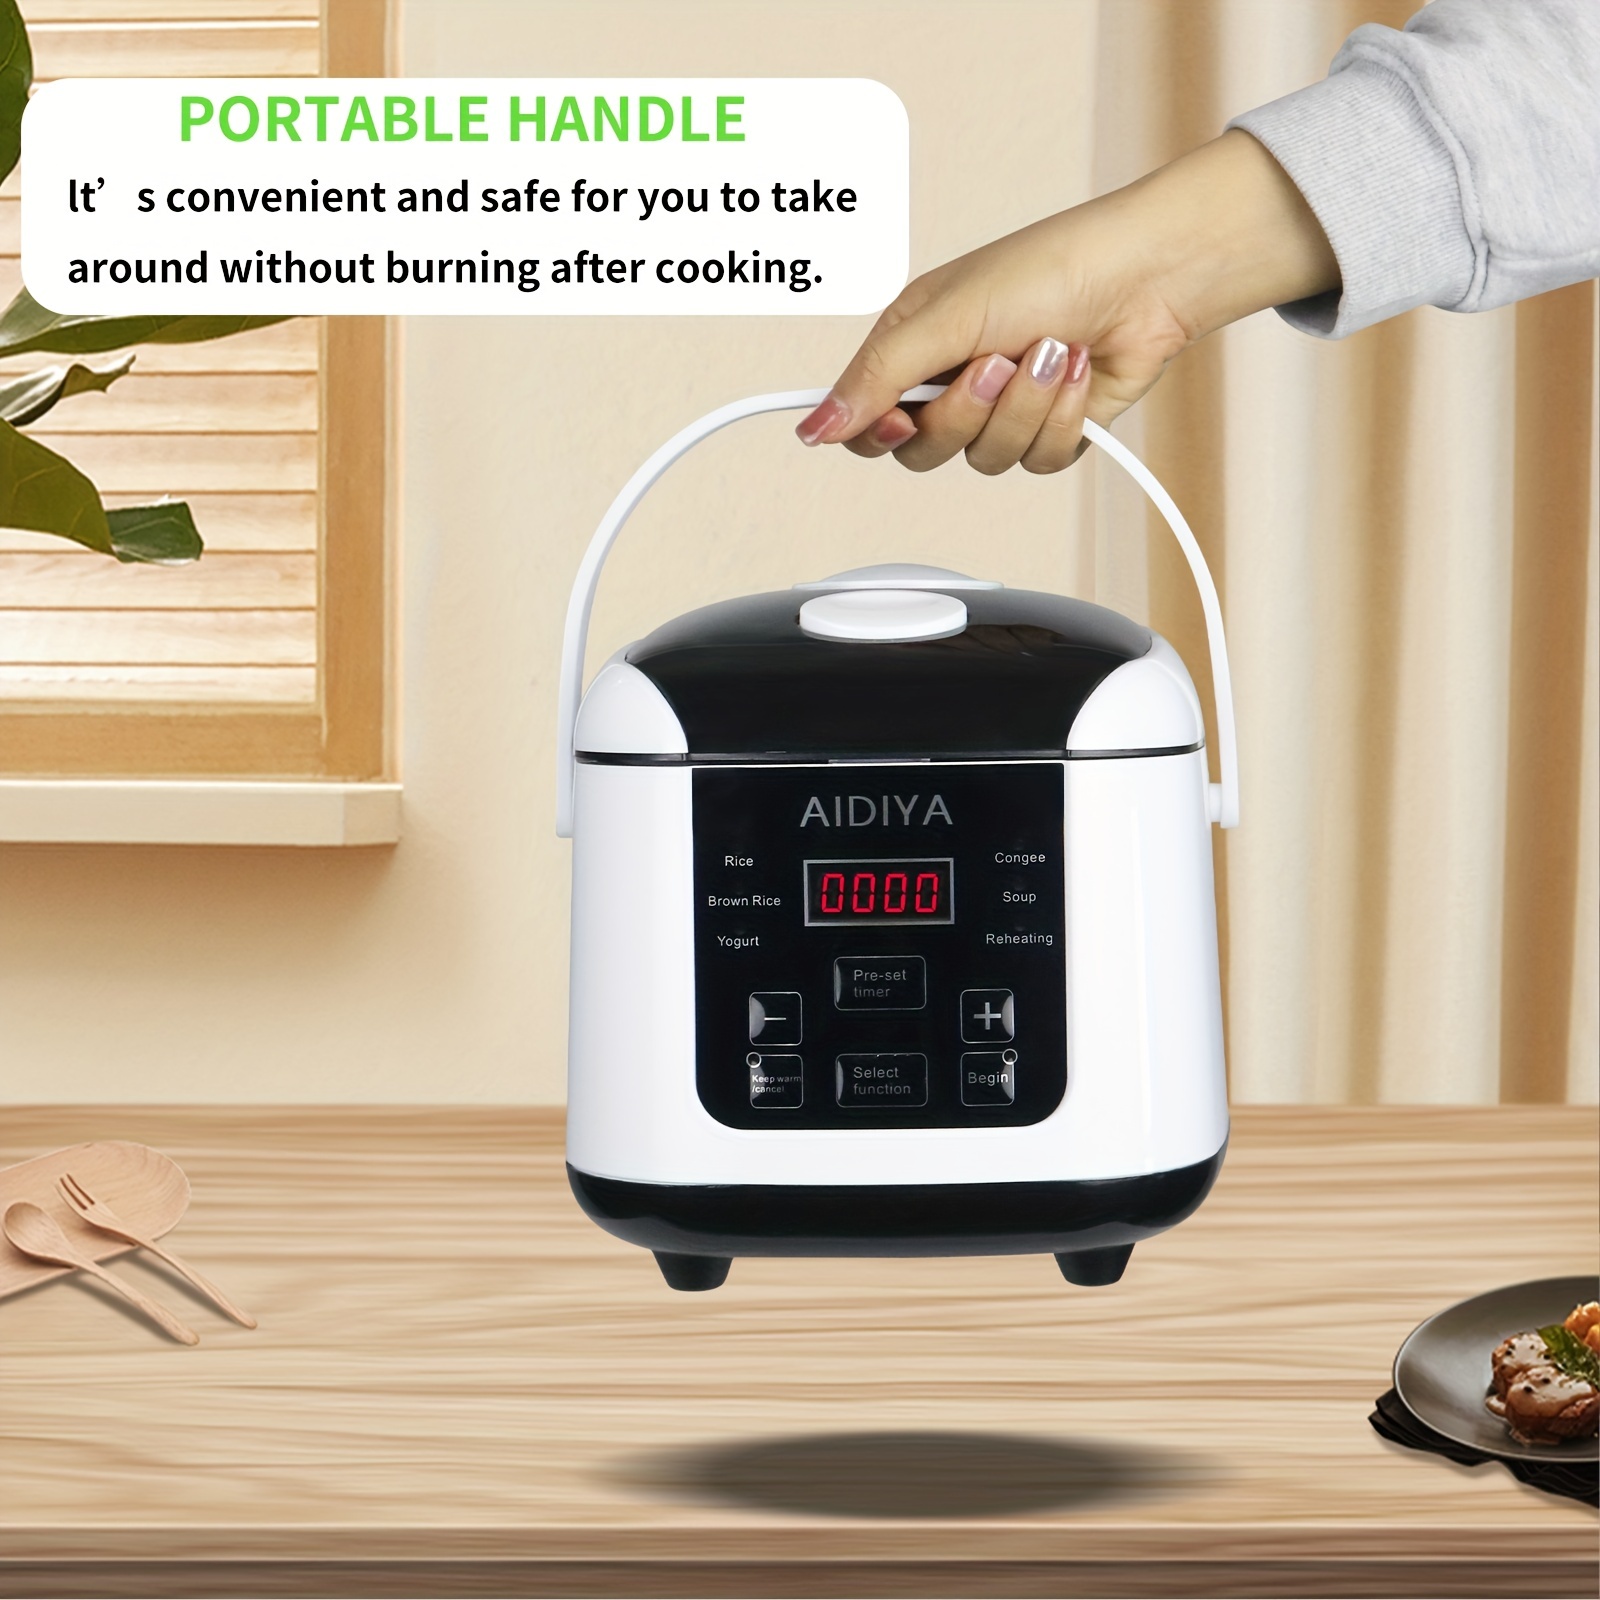 MOOSUM Electric Rice Cooker with One Touch for Asian Japanese Sushi Rice,  3-cup Uncooked/6-cup Cooked, Fast&Convenient Cooker with Ceramic Nonstick